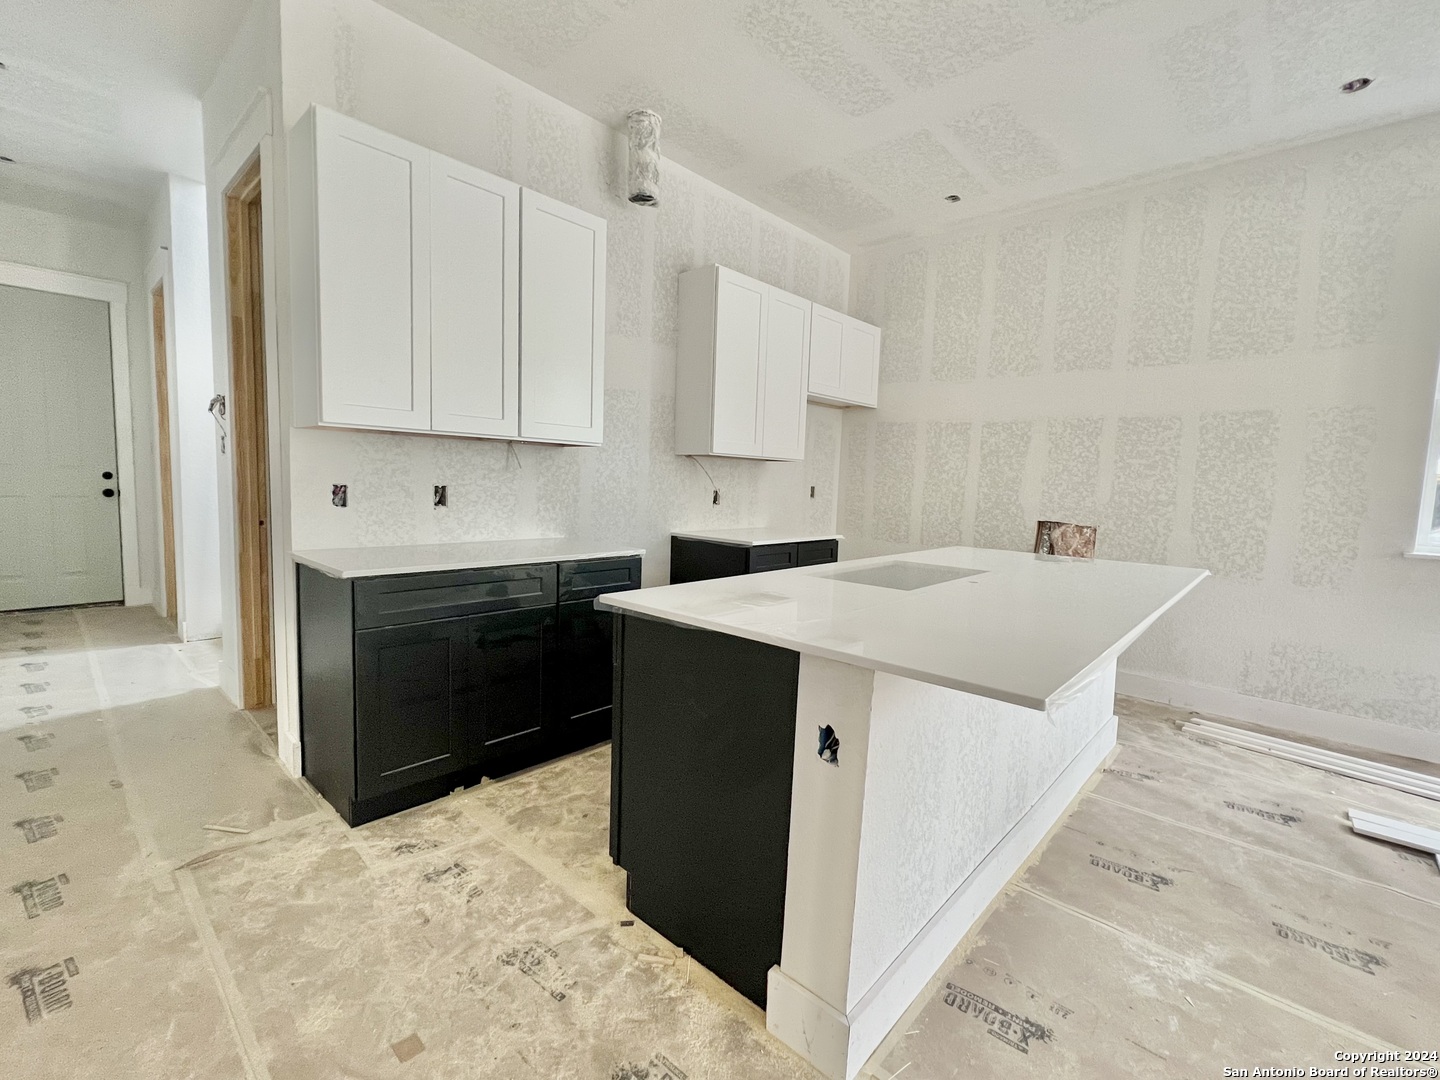 New Construction! Affordable and Spacious 2 story Duplex Unit Minutes from downtown, Frost Bank Center, shopping, restaurants. Front door Parking and street parking, quartz countertops, shaker custom cabinets